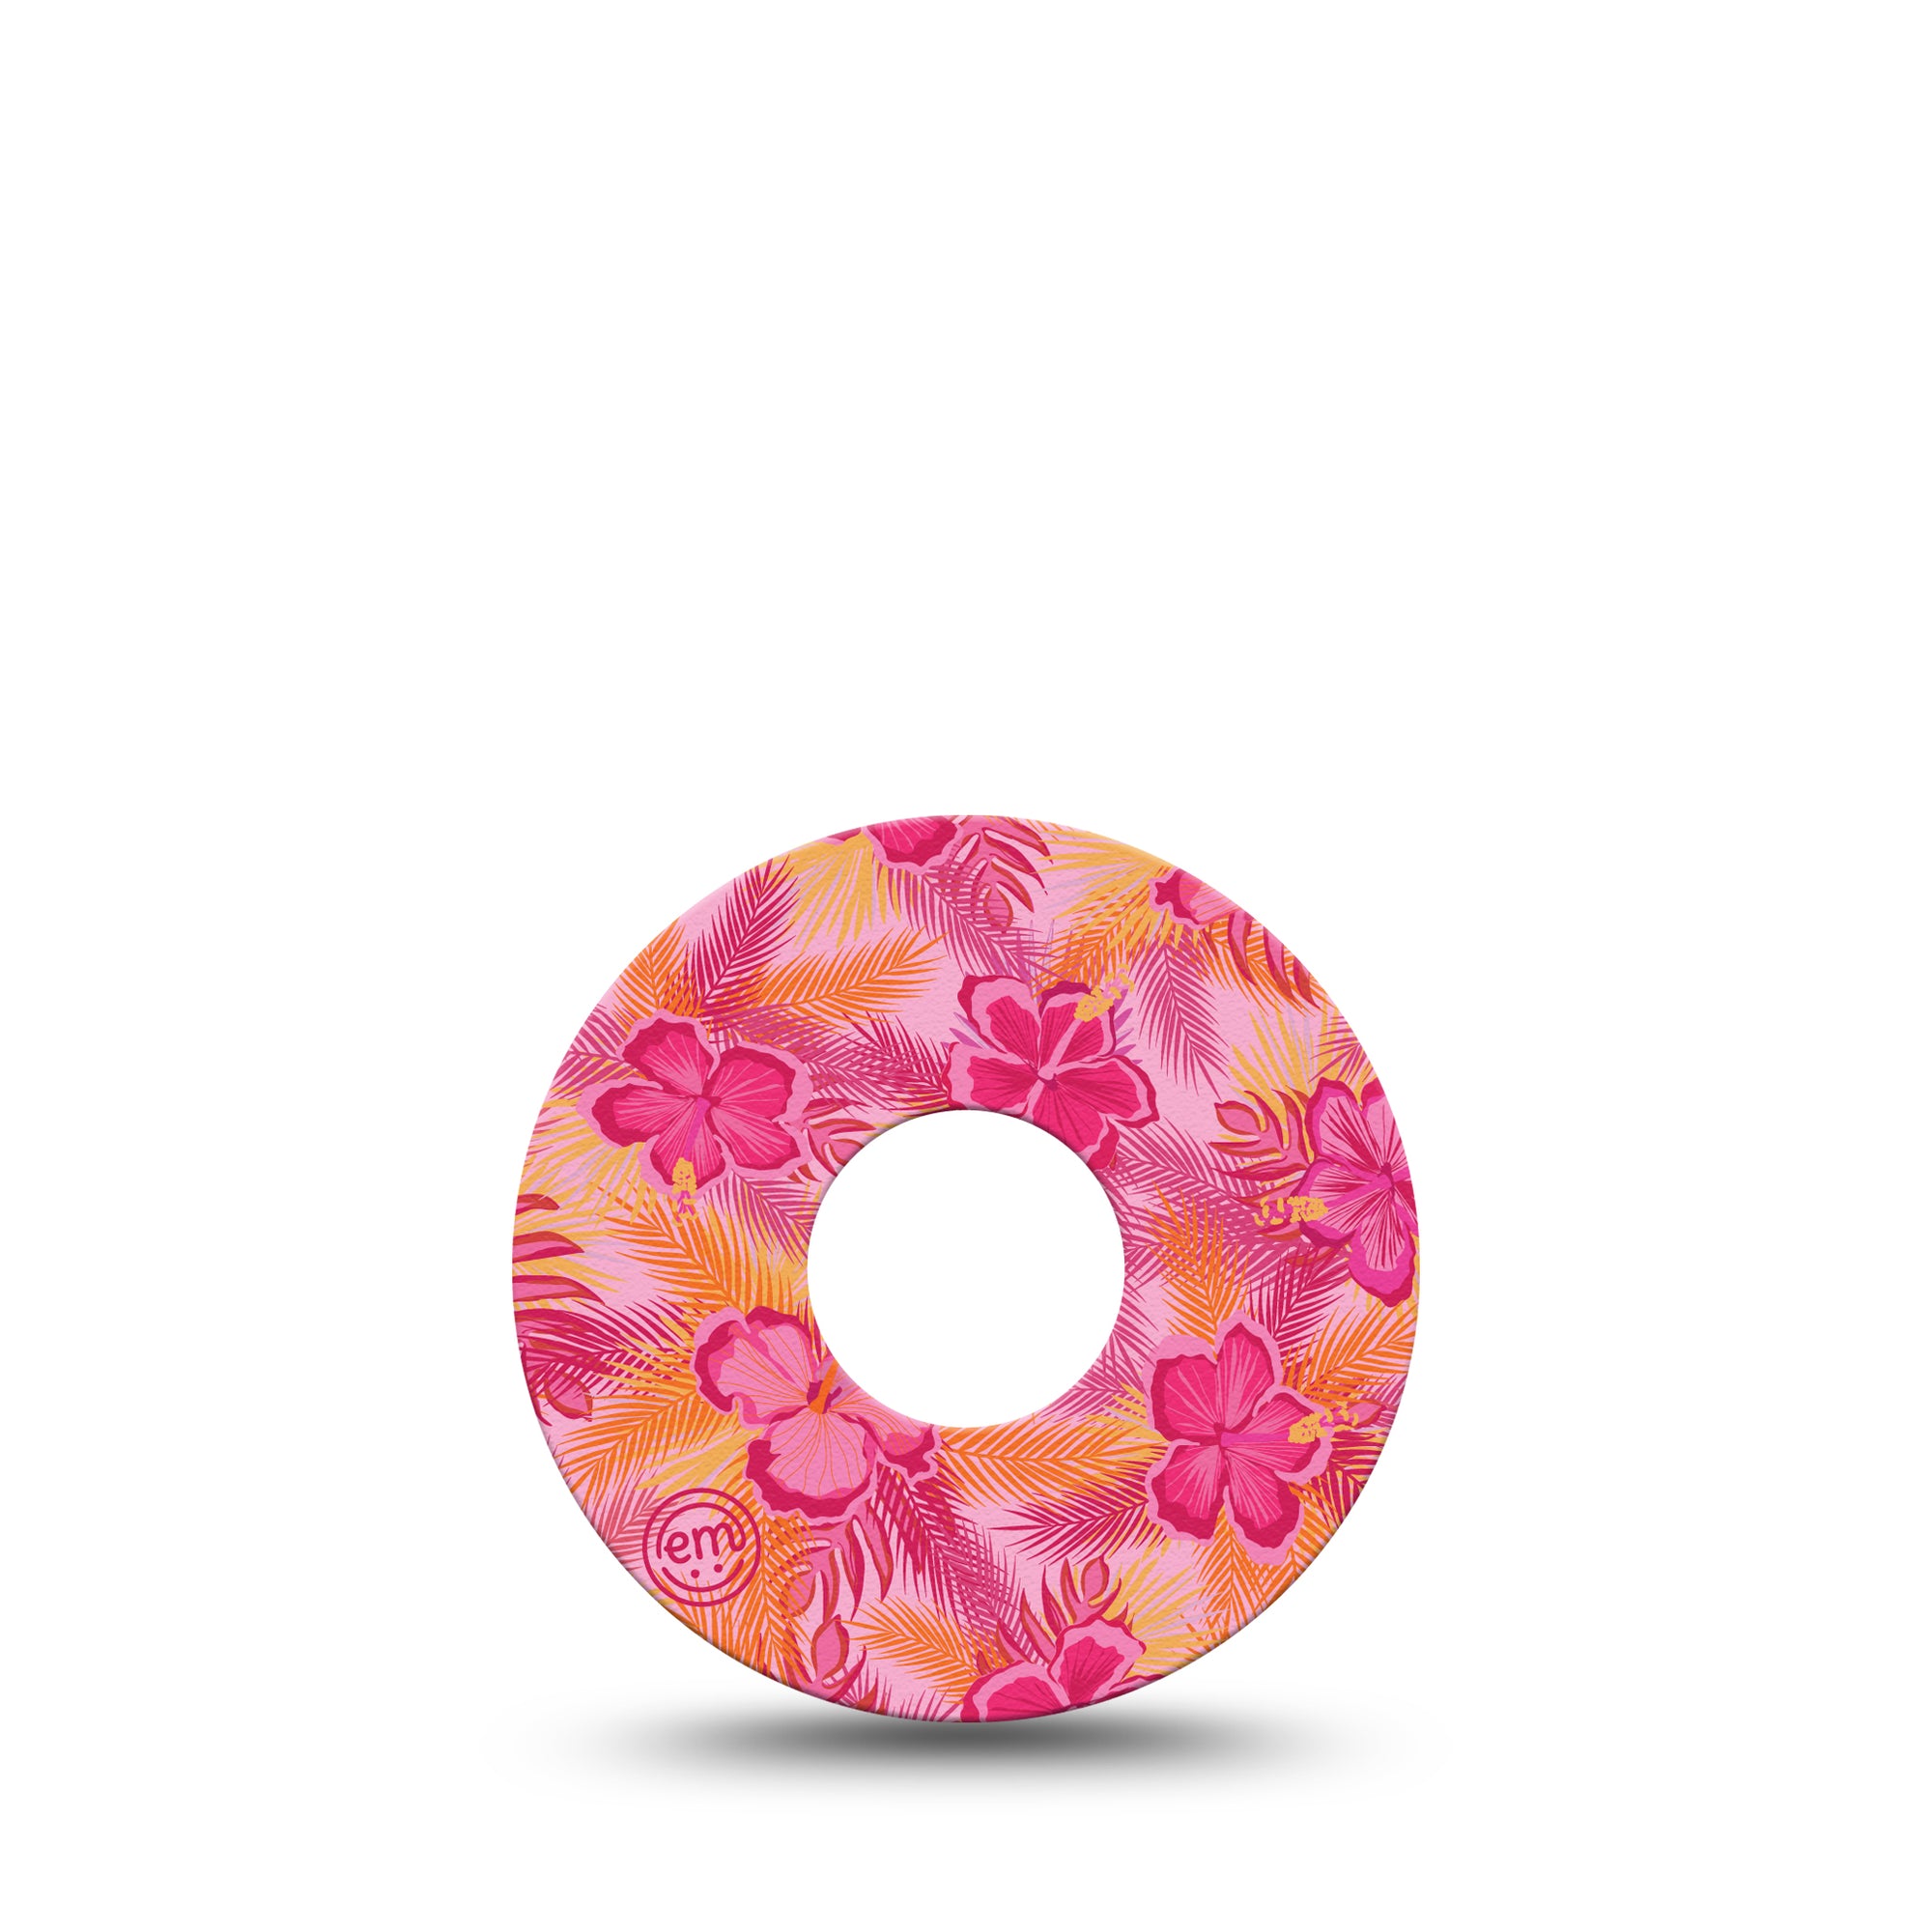 ExpressionMed Pink Hibiscus Libre 3 Tape, Single, Pink Florals Orange Stems Themed, CGM Plaster Patch Design